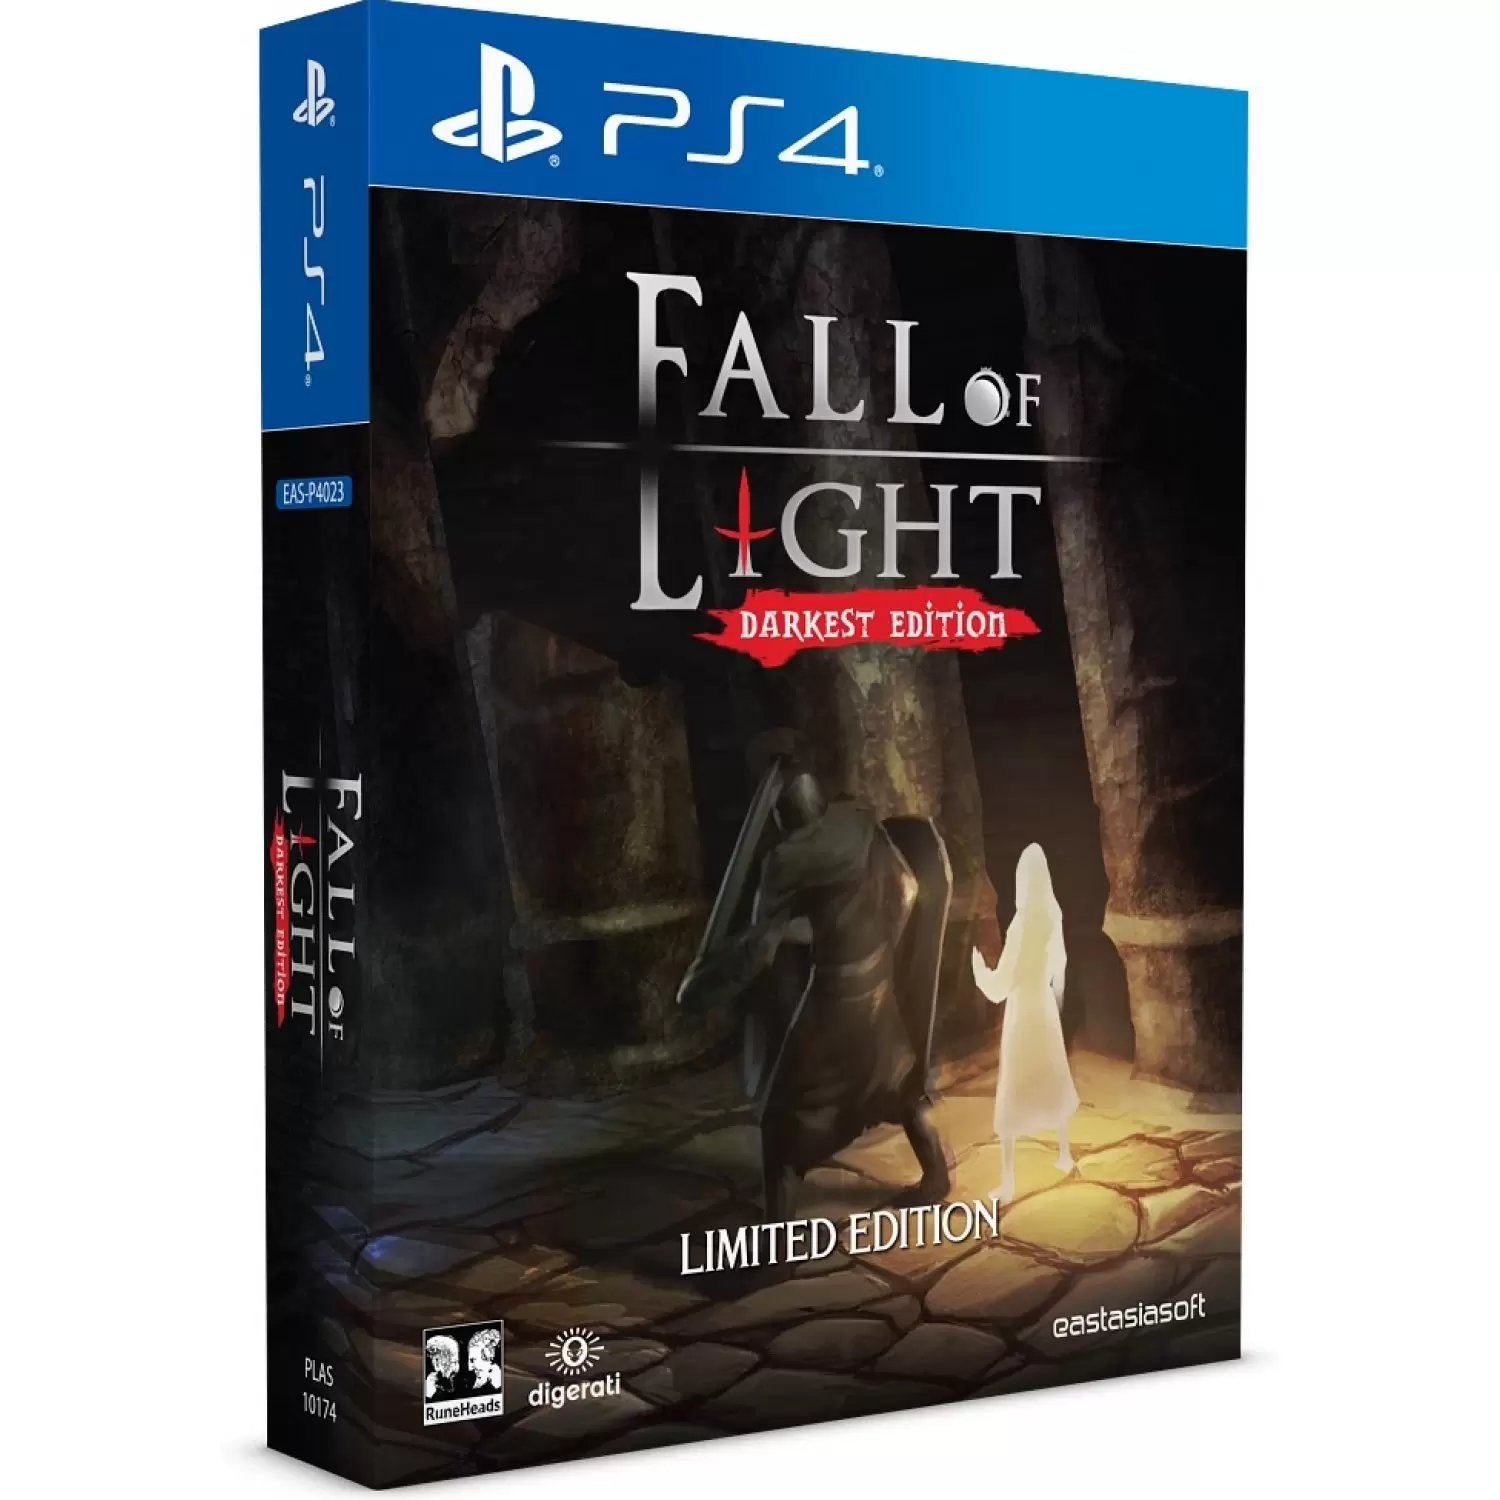 PS4 Games - Fall of Light: Darkest Edition [Limited Edition]